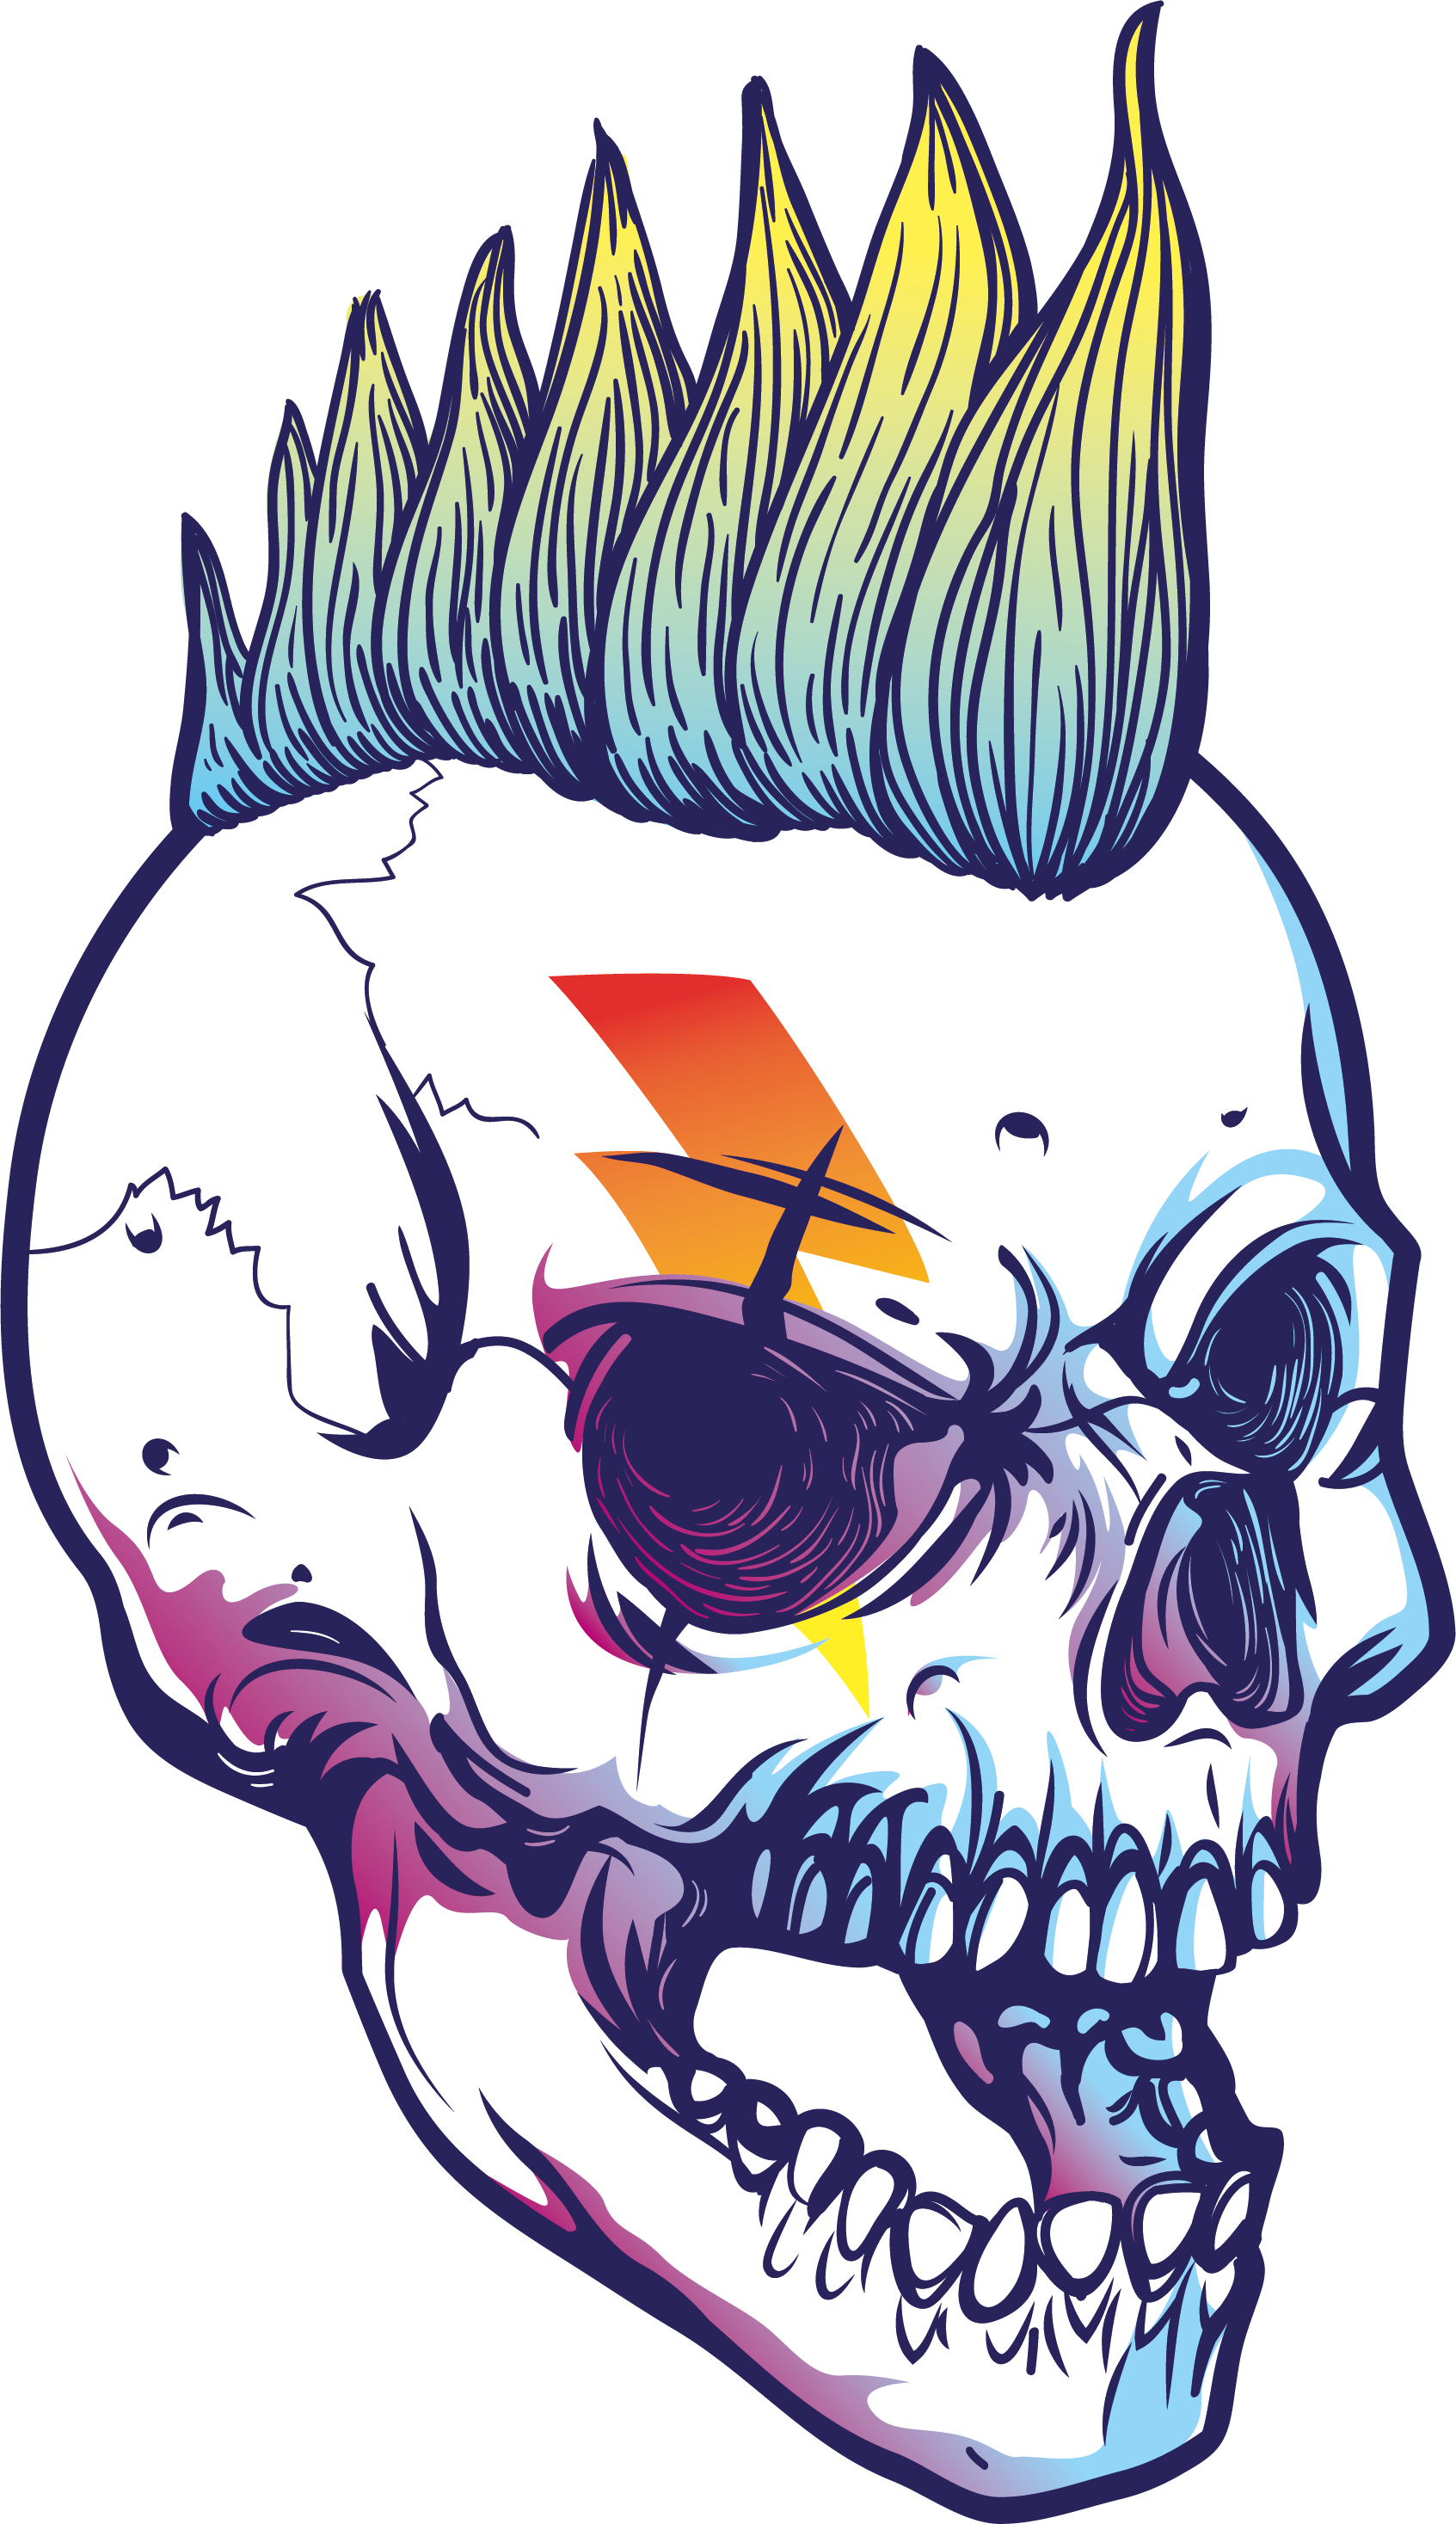 Death clipart skull drawing, Death skull drawing Transparent FREE for